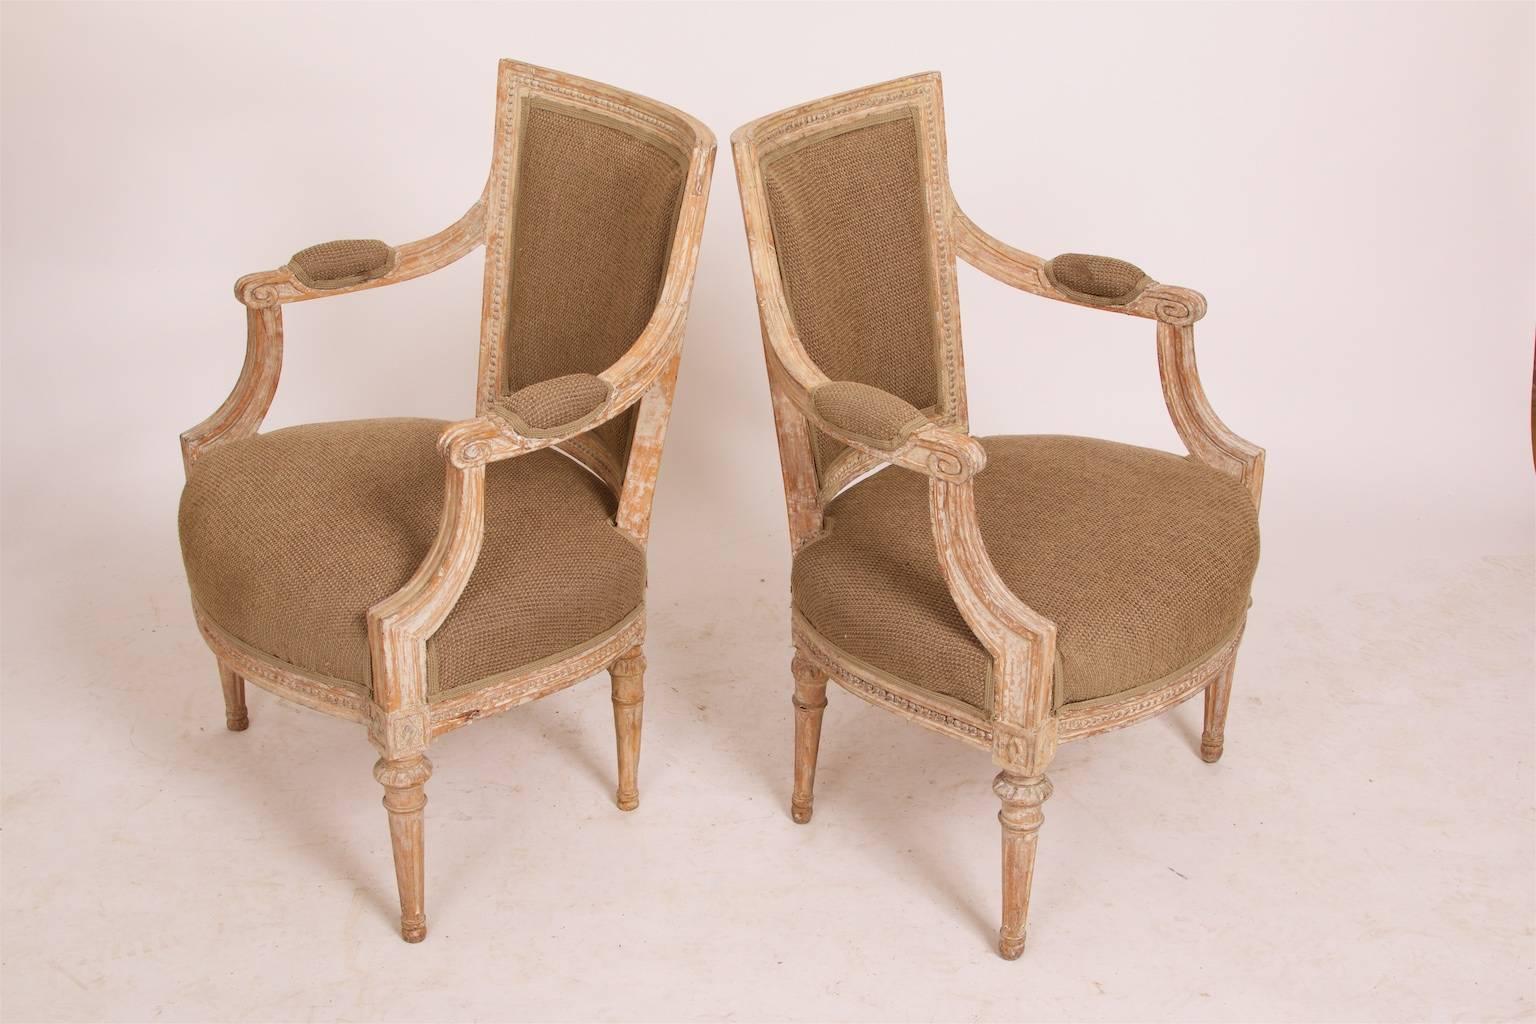 Armchairs, a pair, Gustavian, circa 1790. Sweden
Dry scraped to original color and retouched